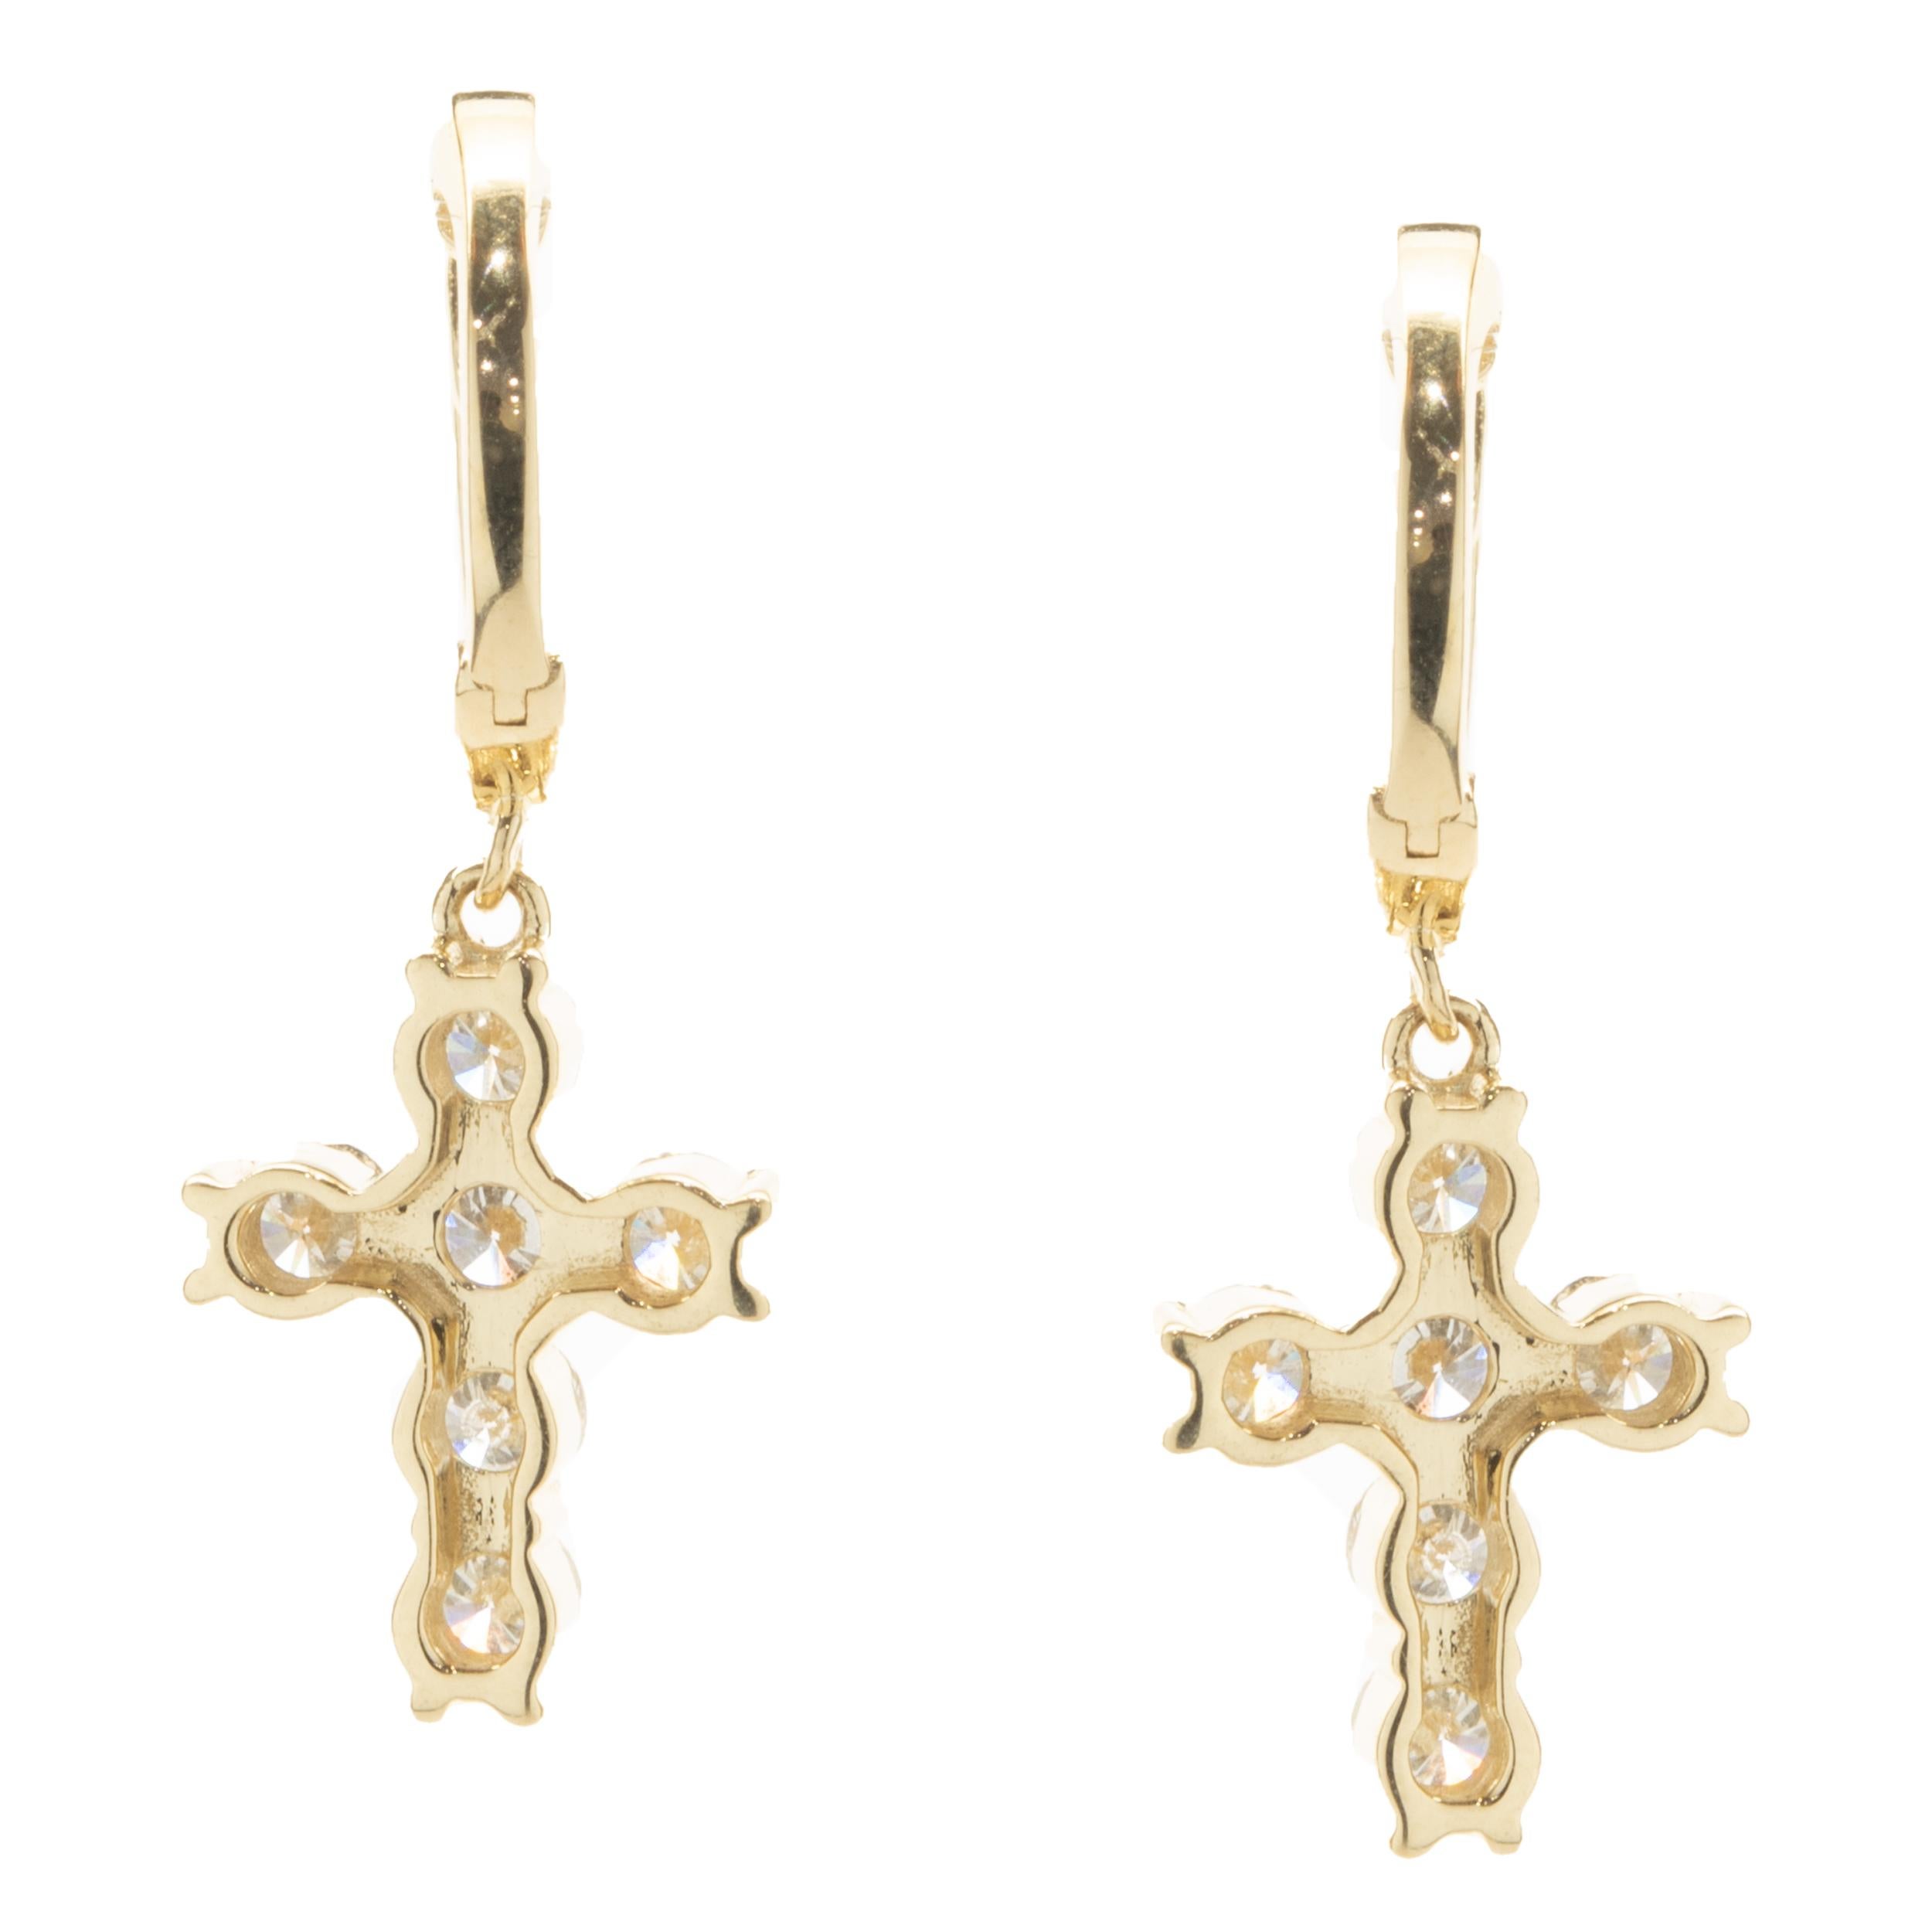 Designer: custom
Material: 18K yellow gold
Diamond: 32 round brilliant = 1.00cttw
Color: G
Clarity: VS1-2
Dimensions: earrings measure 24.50mm in length
Fastenings: post with snap backs
Weight: 3.27 grams